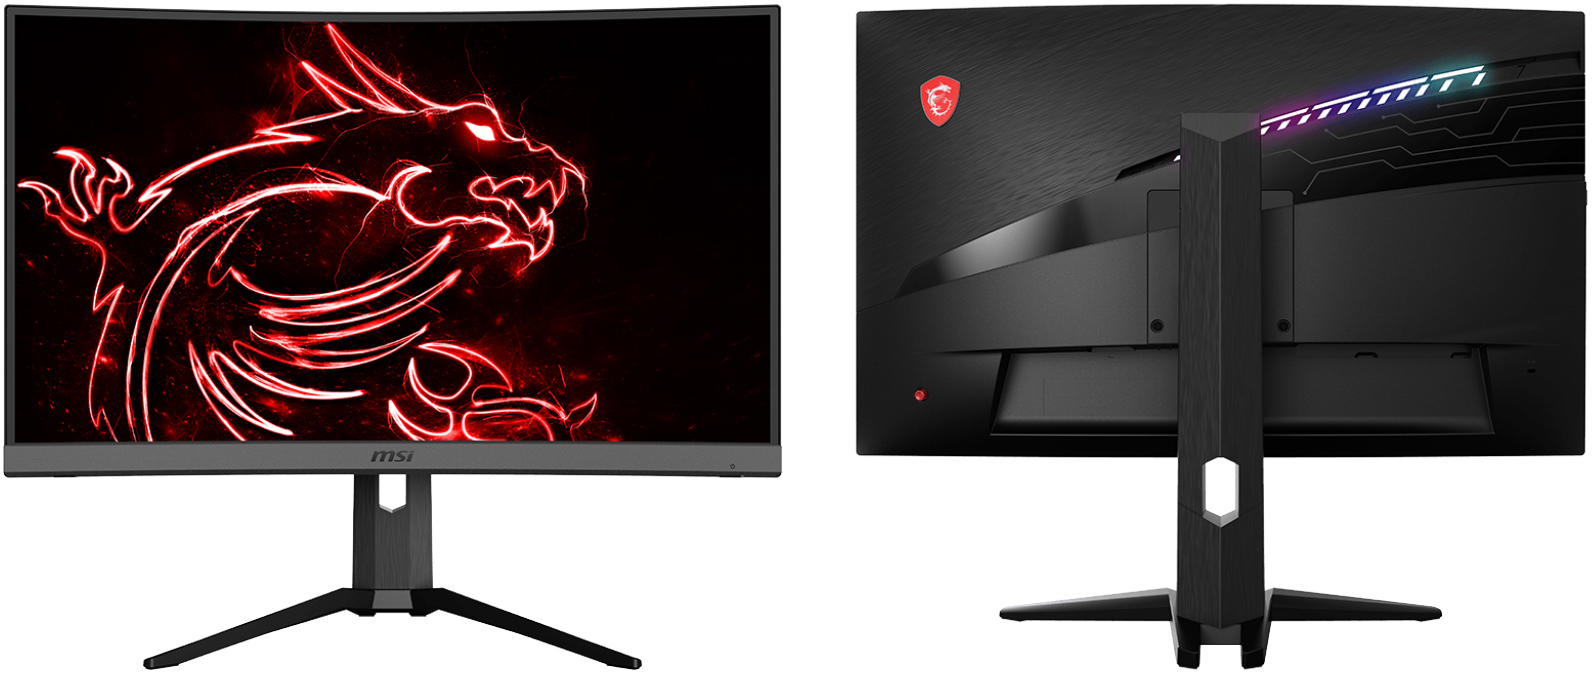 hug head teacher Nominal MSI Launches Optix MAG272CRX: A 27-Inch, 240Hz Curved Monitor with USB-C